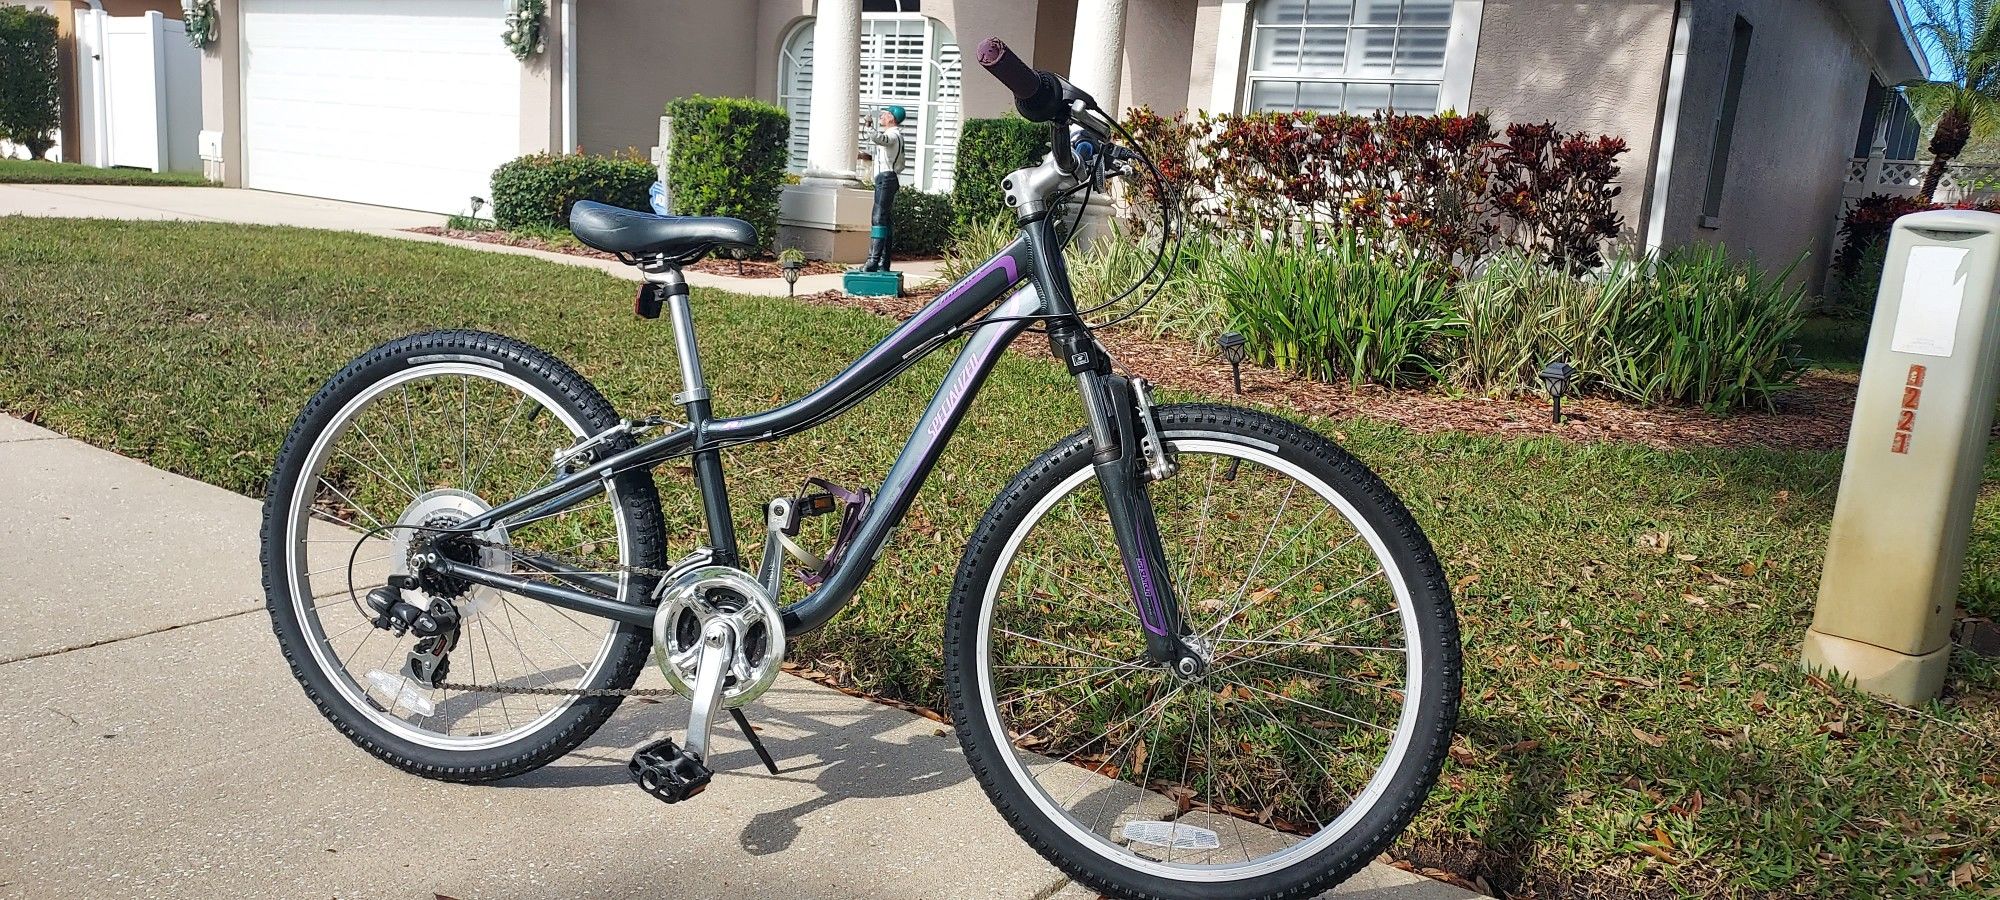 24 Inches Tires,  Specialized 